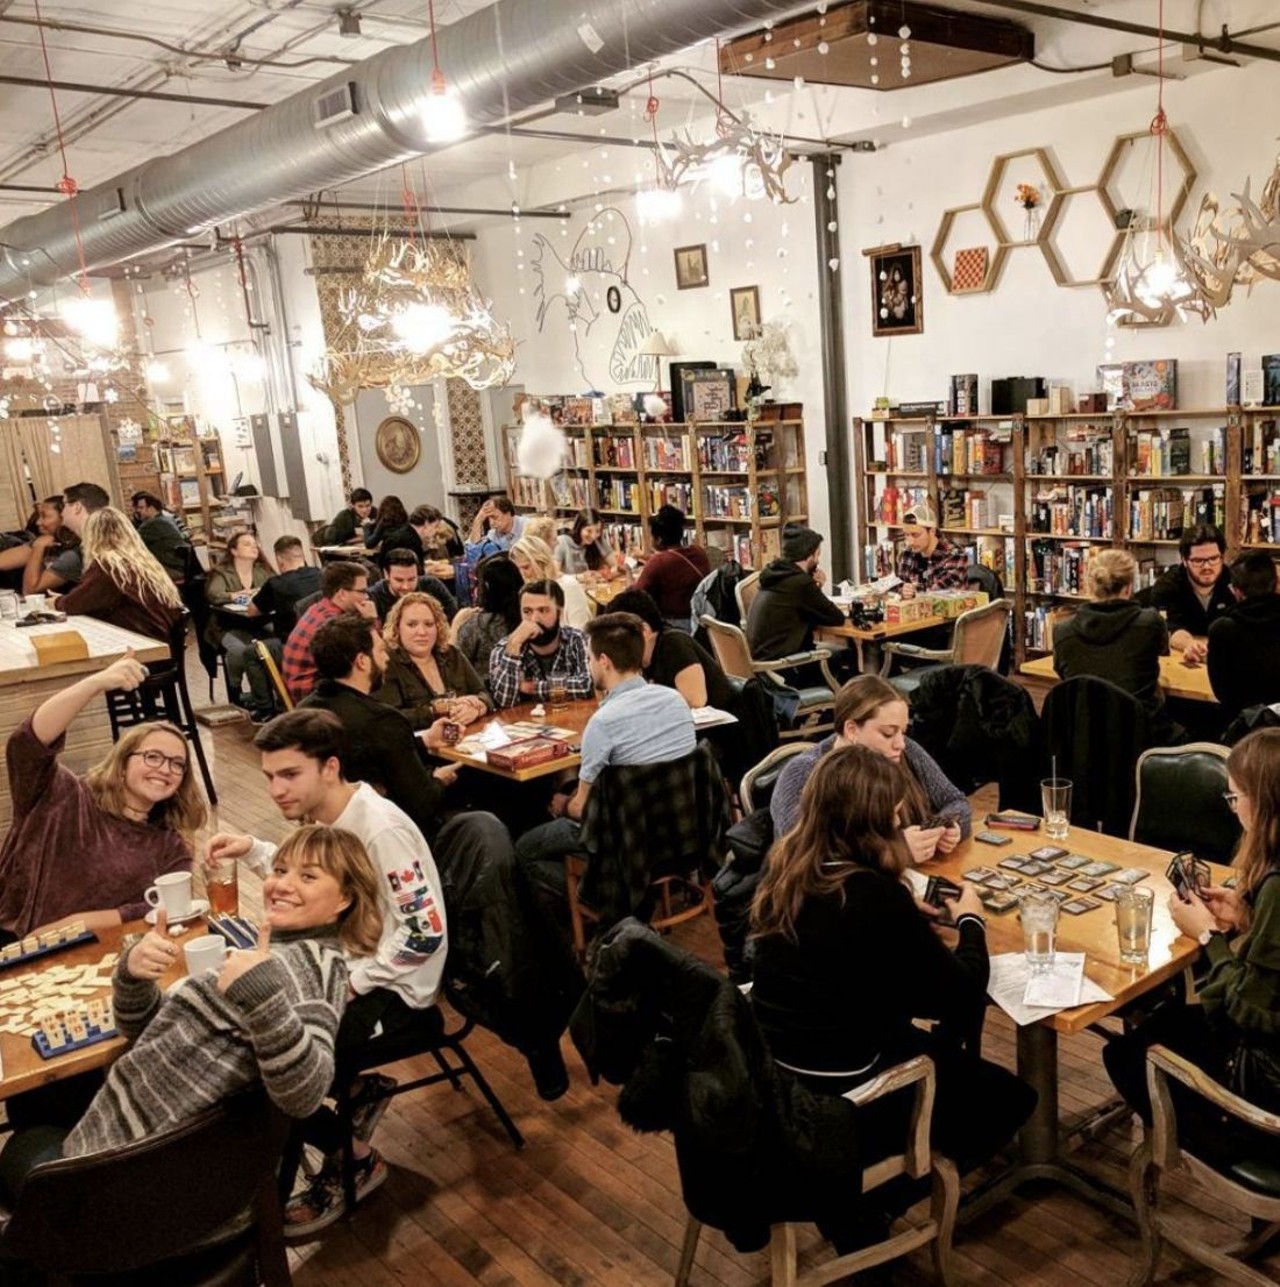 Rent a Board Game Quarantine Pack From Tabletop Cafe
Photo via Scene Archives